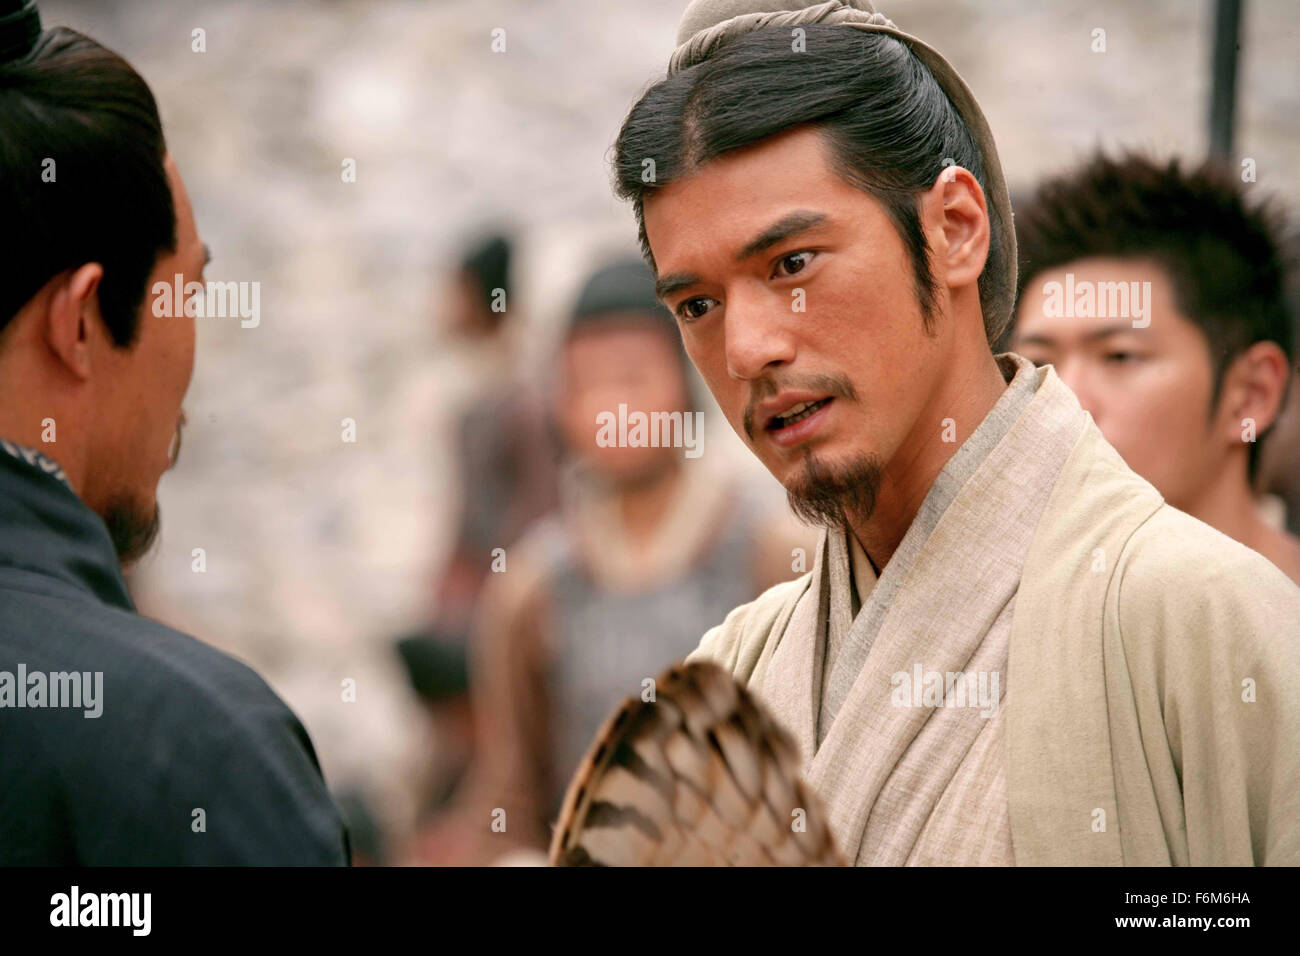 RELEASE DATE: July 10, 2008. MOVIE TITLE: Red Cliff. STUDIO: Avex Entertainment. PLOT: Based on the events during the Three Kingdoms period in Ancient China in which specifically told in the title, The Battle of Red Cliffs. PICTURED: TAKESHI KANESHIRO as Zhuge Liang. Stock Photo